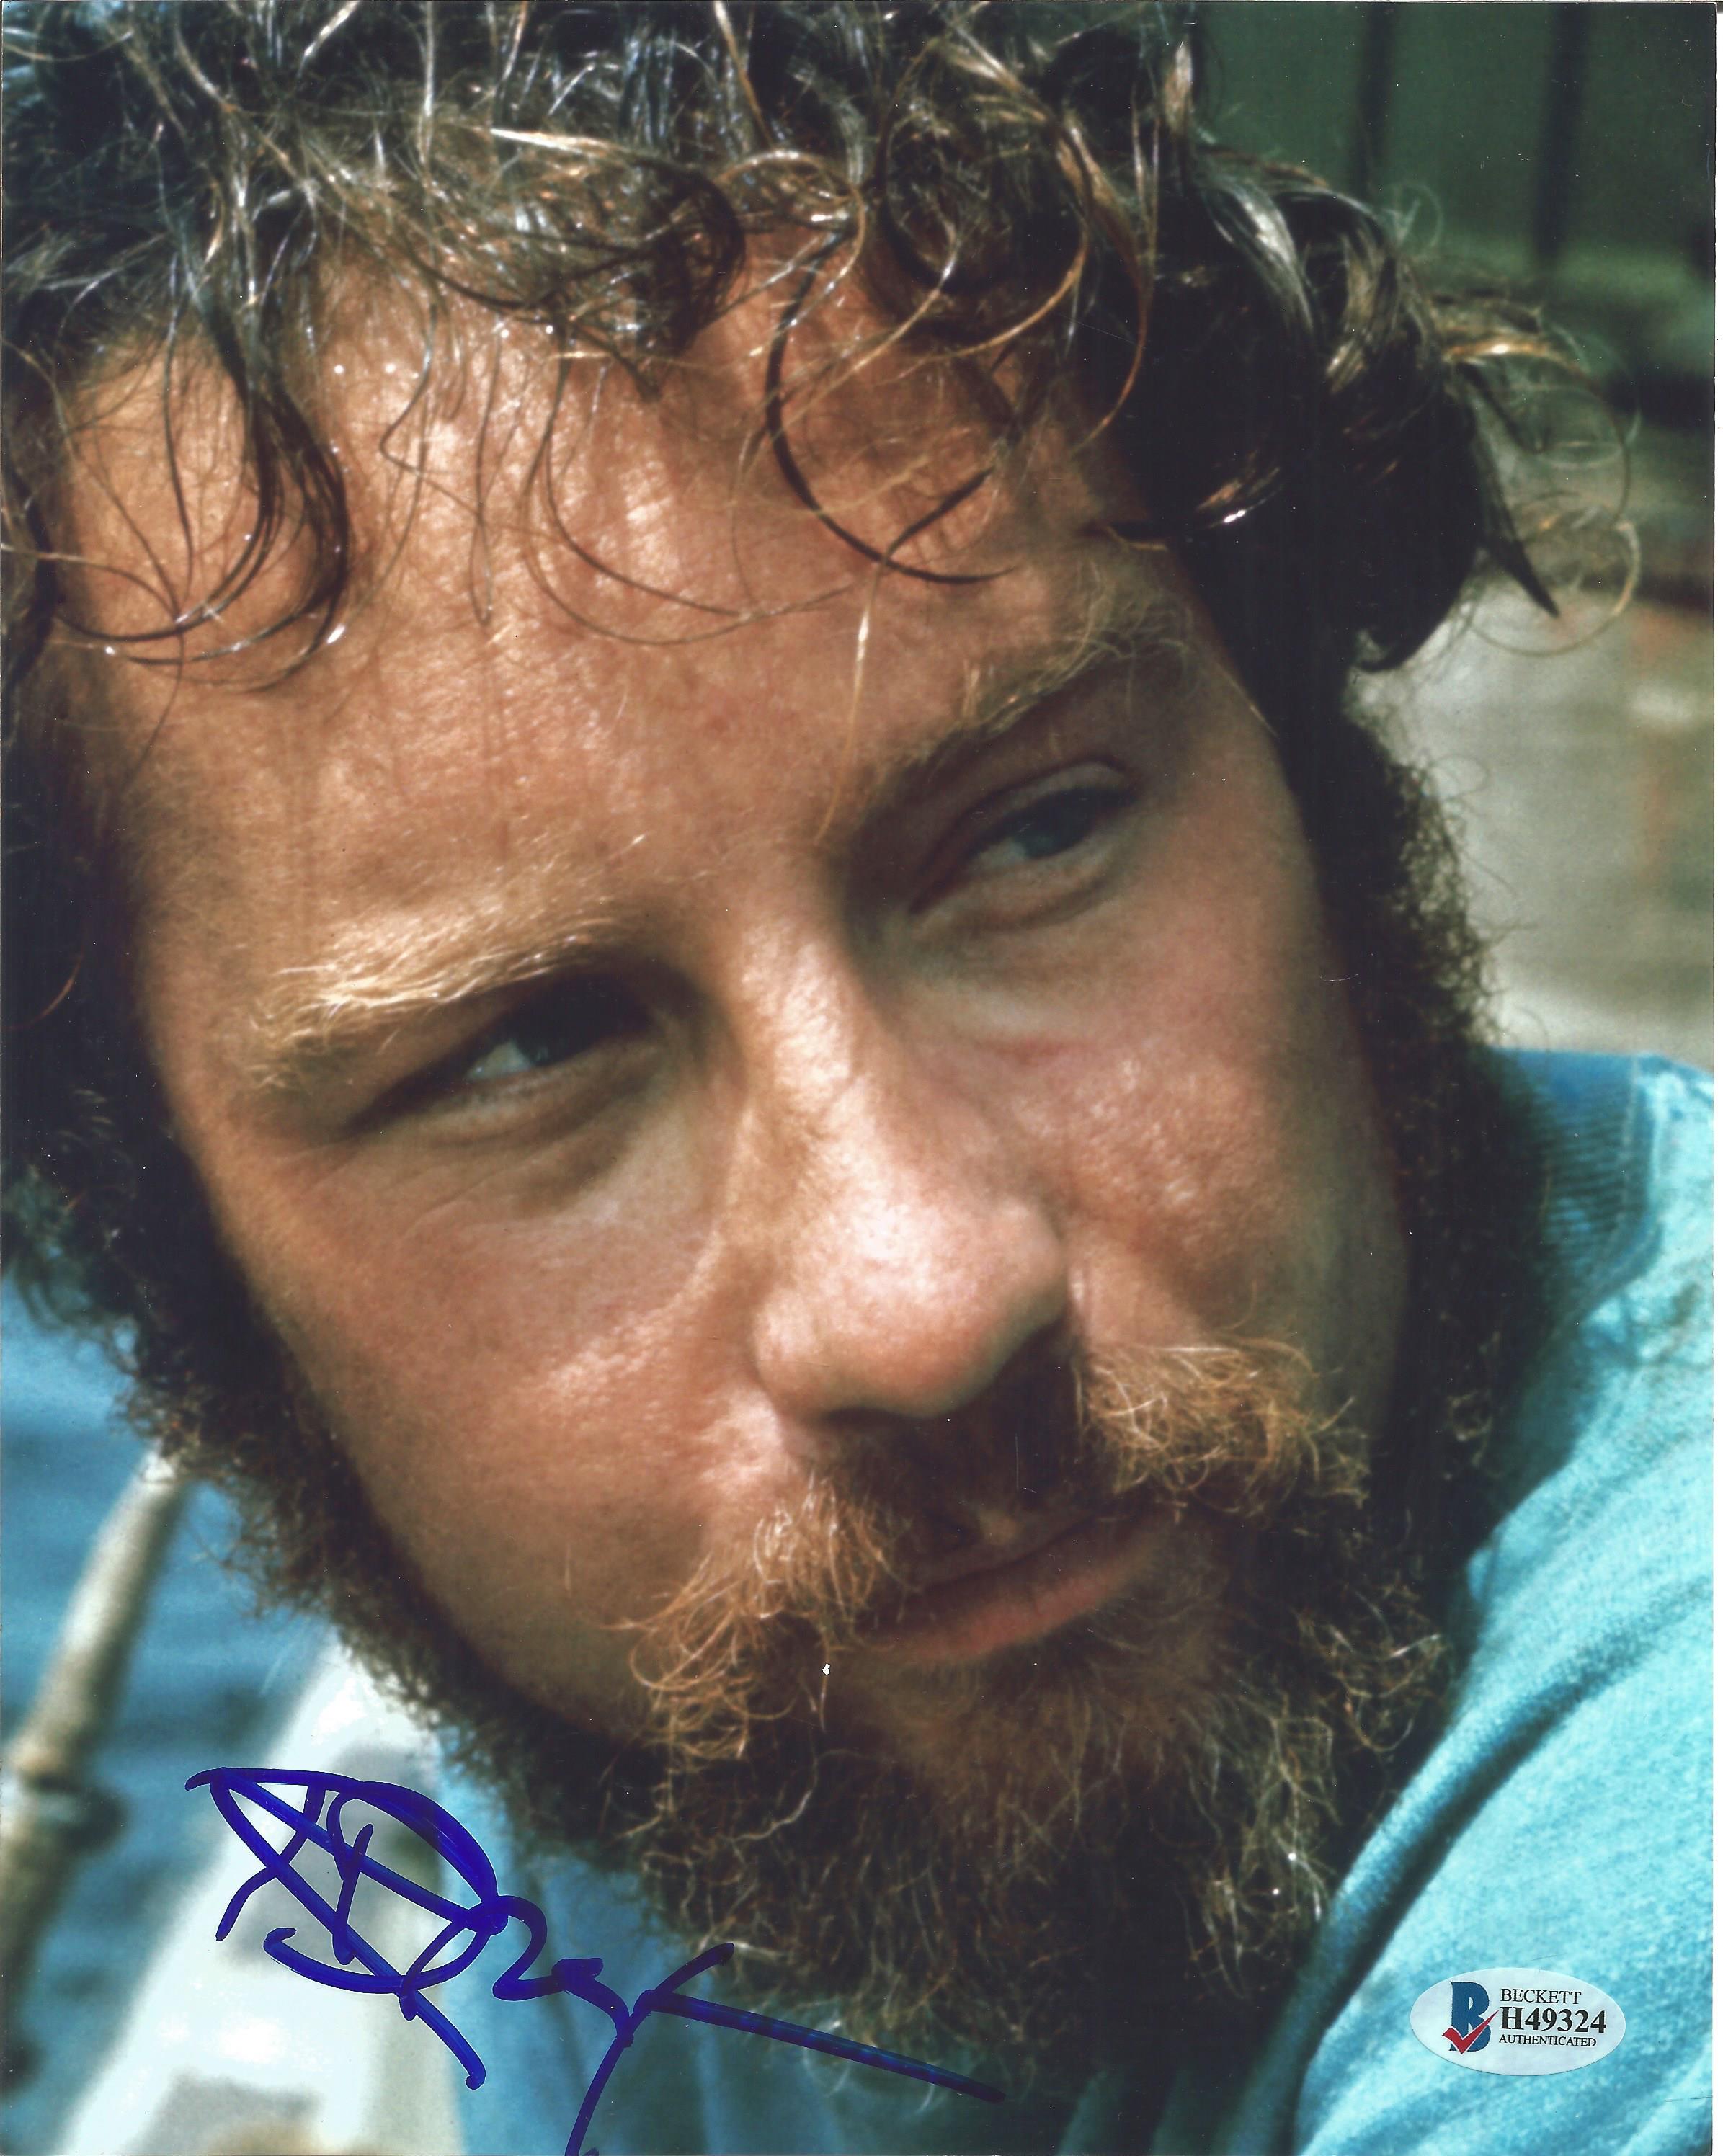 Jaws Richard Dreyfuss signed 10x8 colour photo. Good Condition. All autographed items are genuine